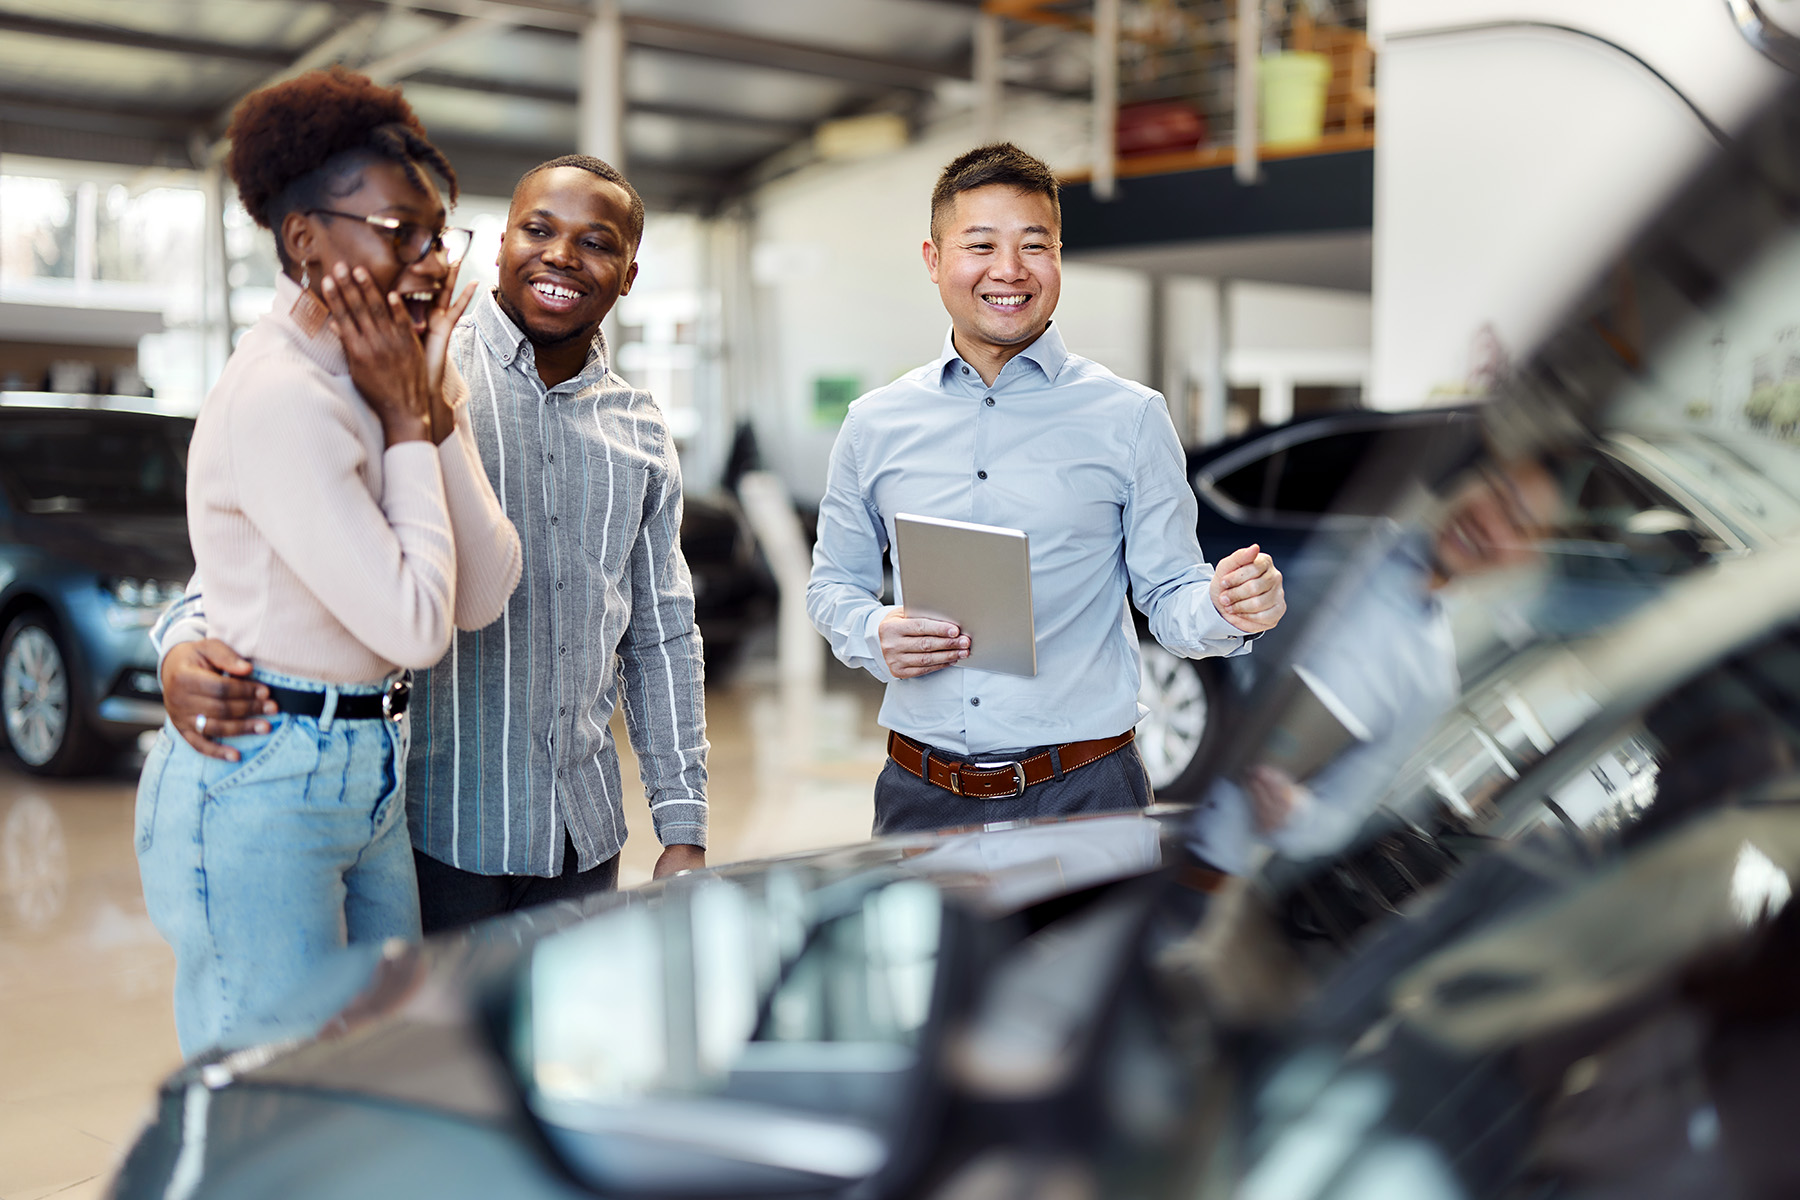 Couple is looking at a car inside a dealer's showroom. The lady has her hands on her face, smiling with her mouth open, the man and the salesperson are laughing giddily.